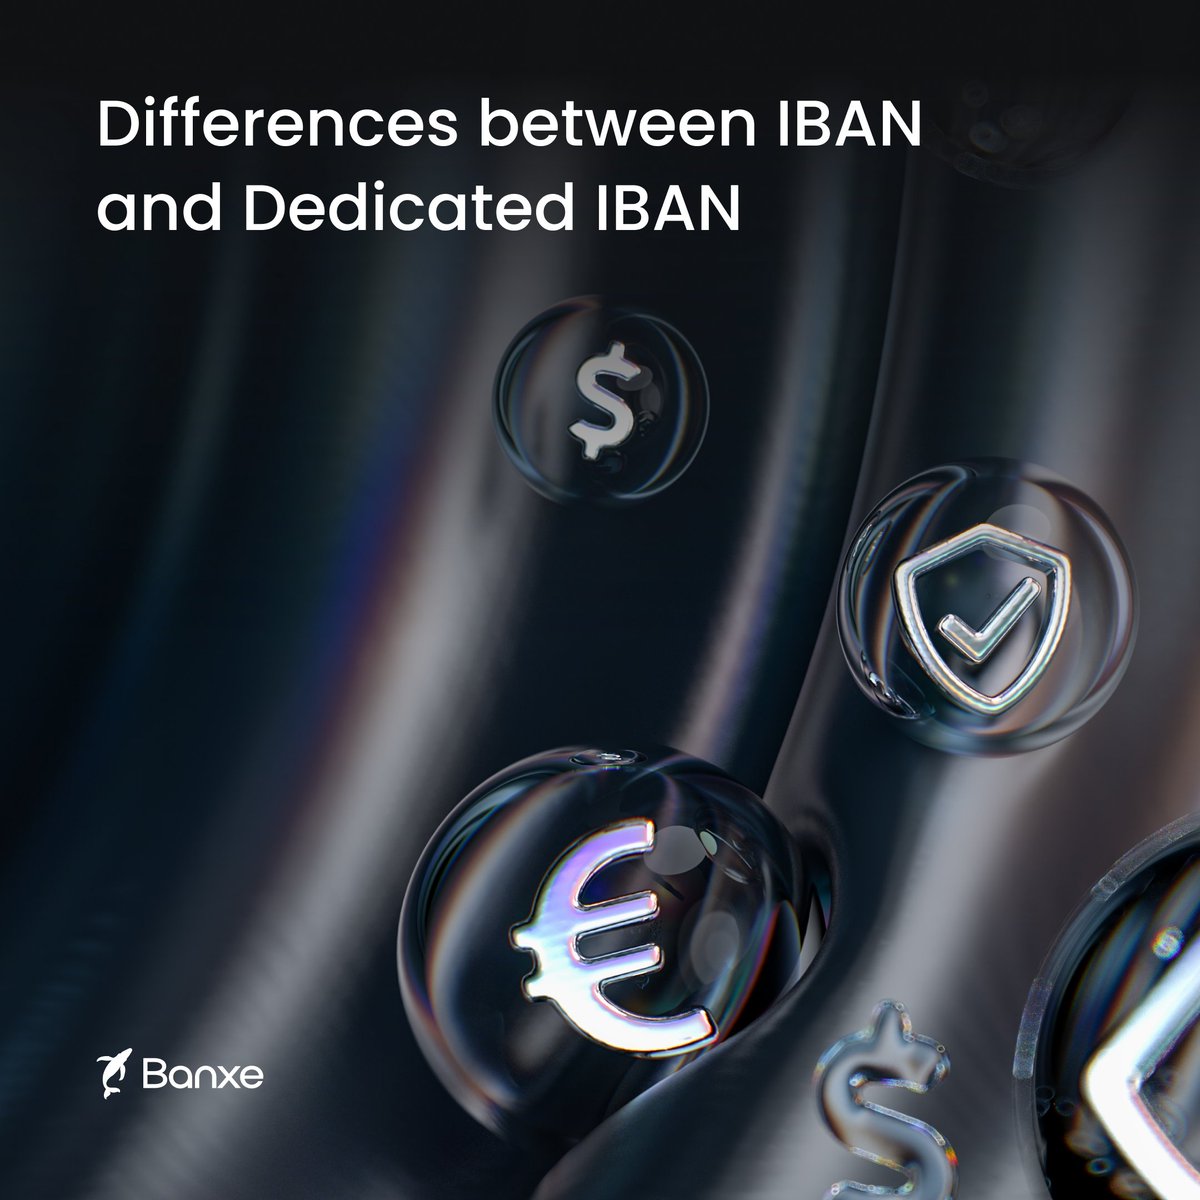 IBAN vs. Dedicated IBAN: 
IBAN = global account ID. Dedicated IBAN = exclusively yours, offering personalized control. Perfect for streamlined payments and enhanced security. Get yours at Banxe.com! 

#IBAN #DedicatedIBAN #Banxe #GlobalBanking